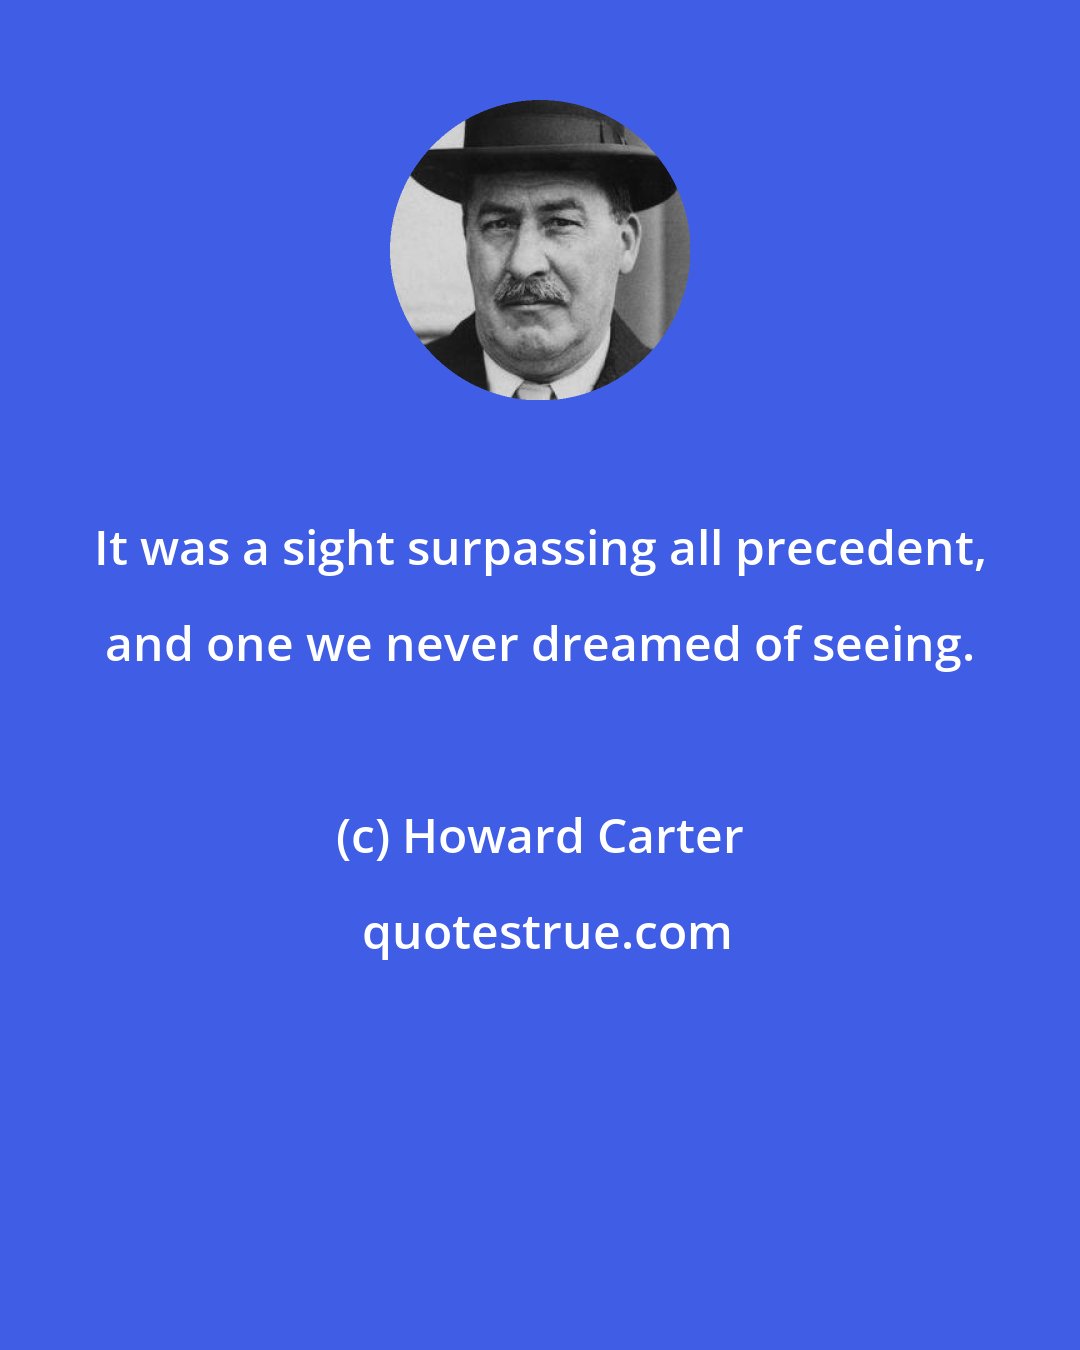 Howard Carter: It was a sight surpassing all precedent, and one we never dreamed of seeing.